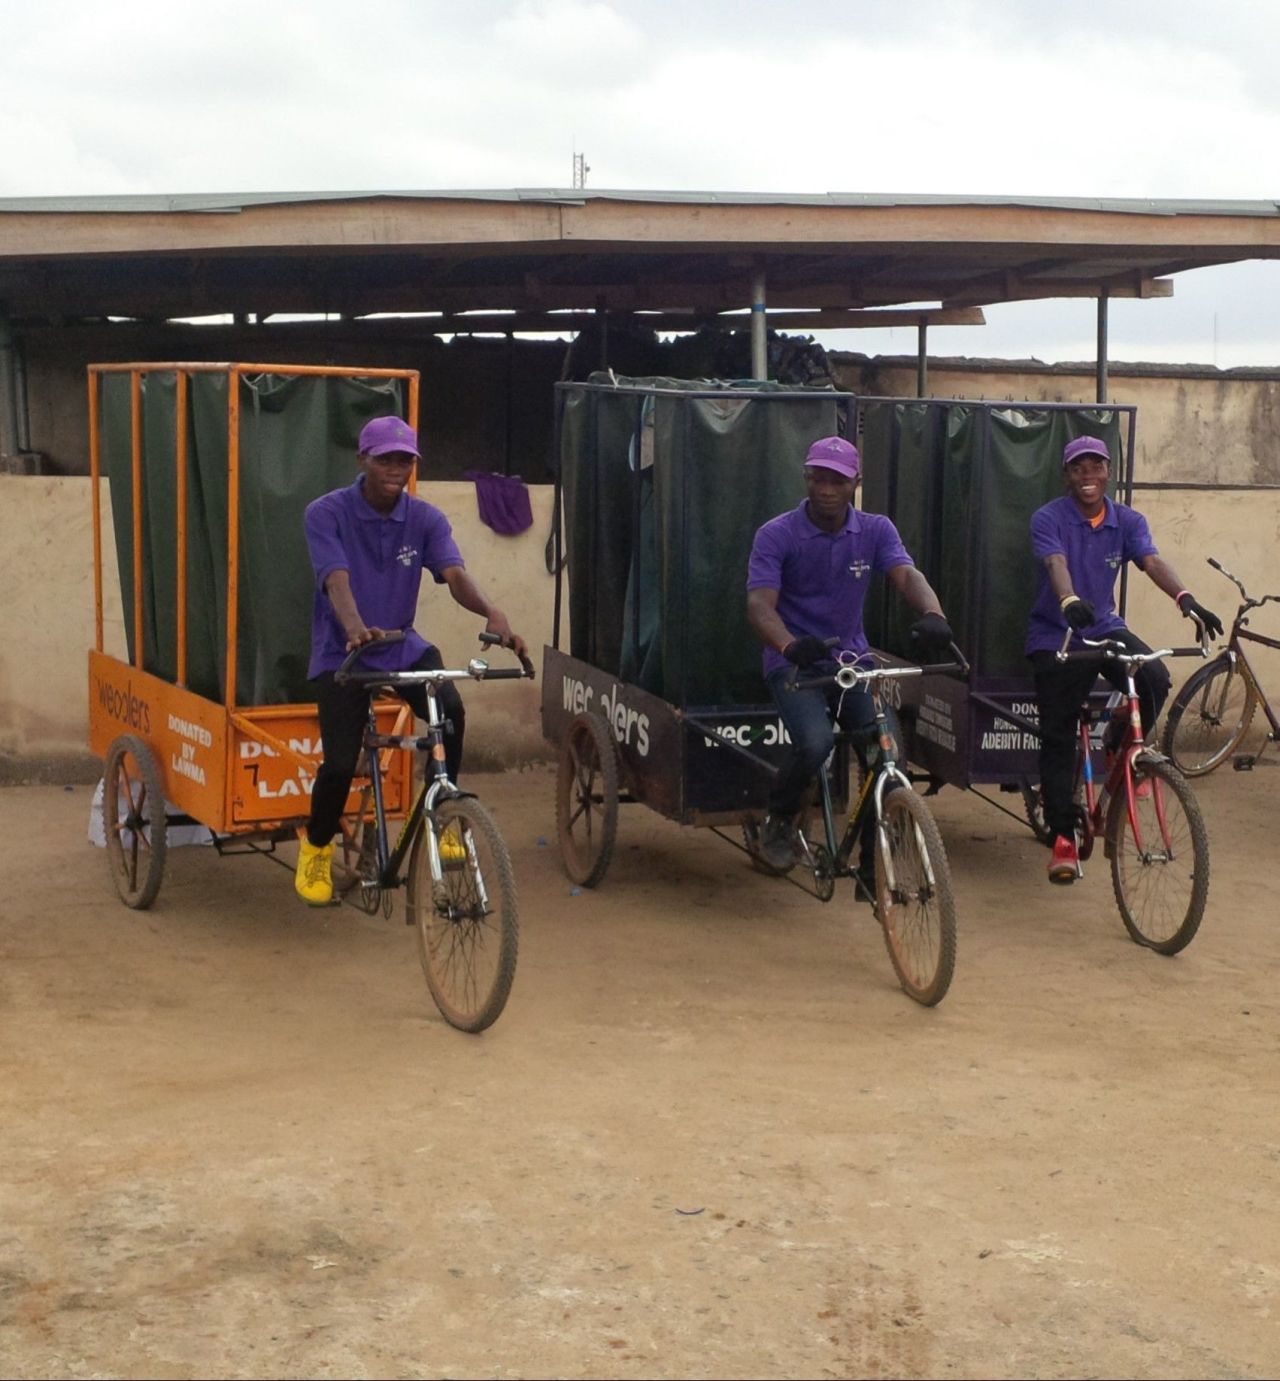 Using a fleet of low-cost cargo bicycles, the startups collects the waste from local people and then sells it on to recycling factories.